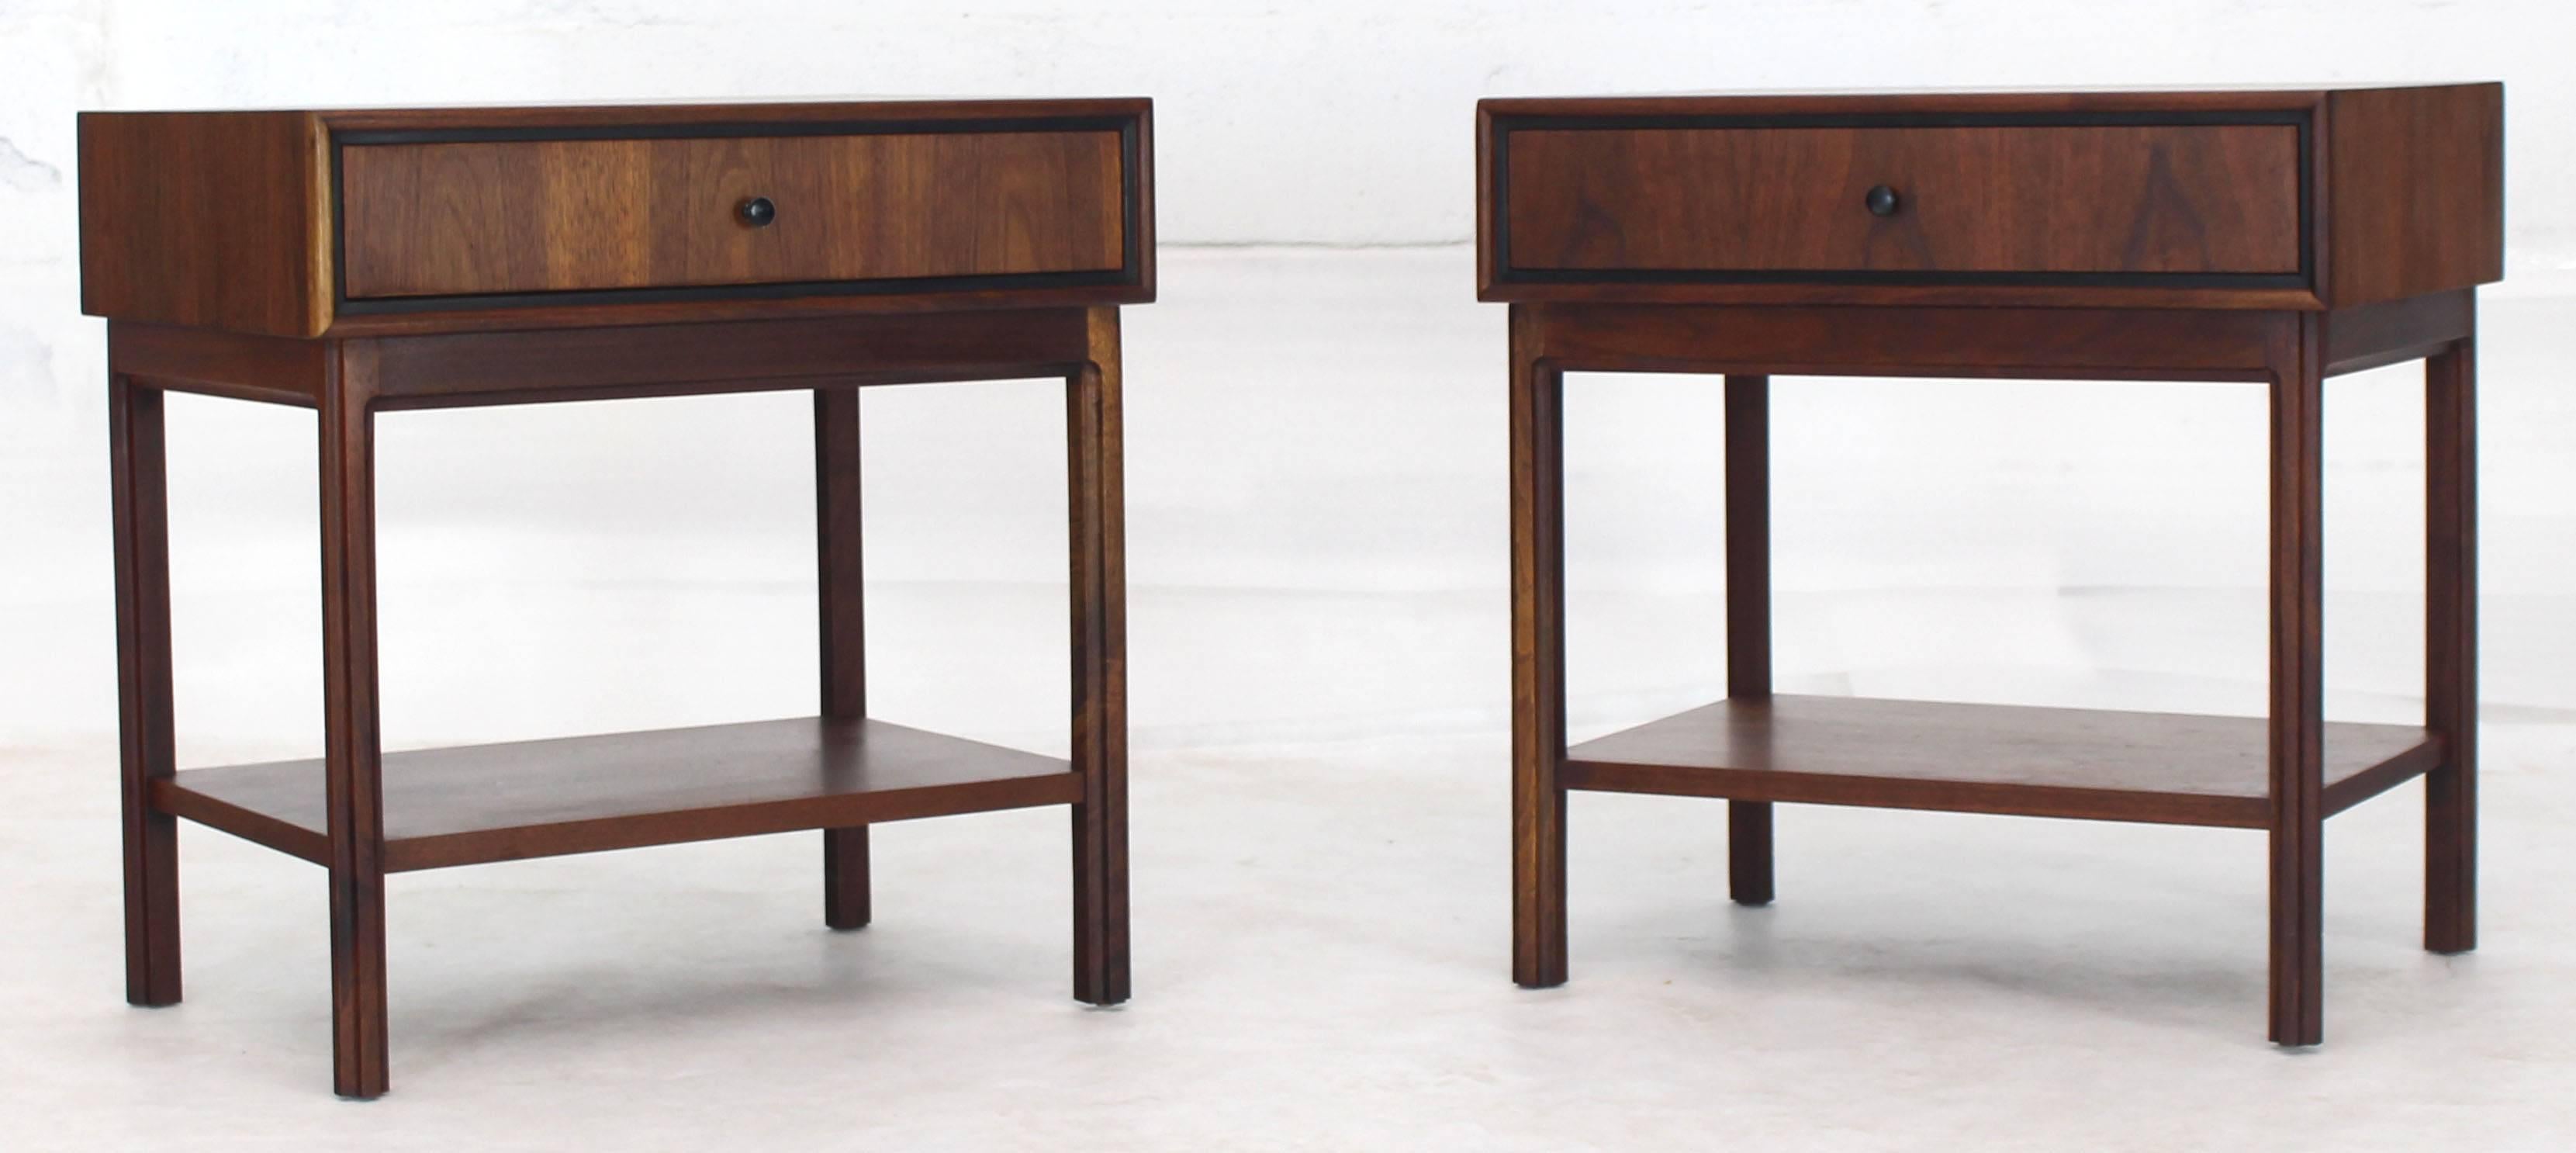 Pair of quality Mid-Century Modern oiled walnut nightstands or end tables.